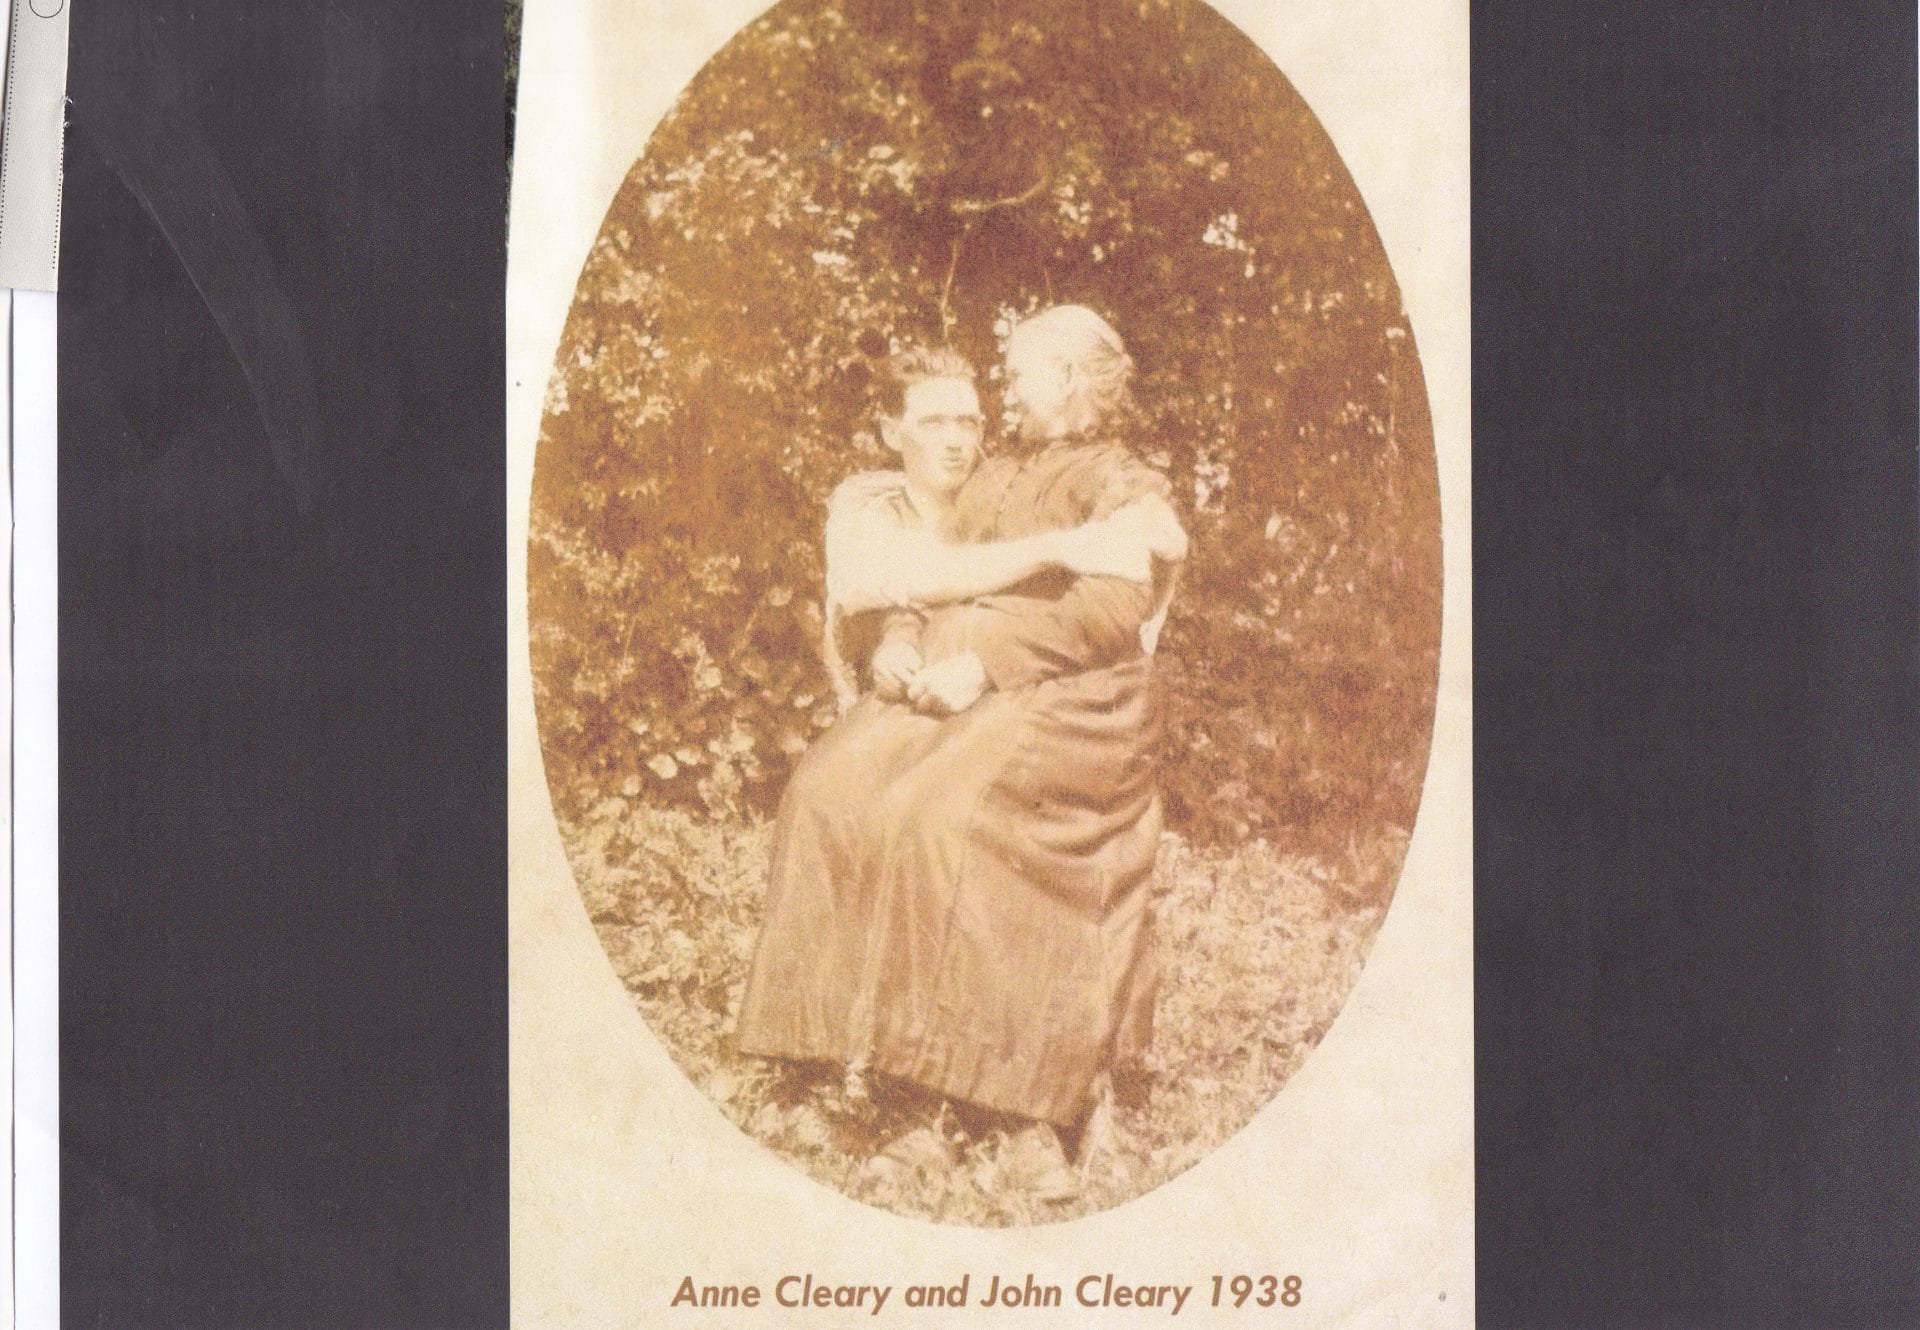 Anne Cleary and John Cleary 1938